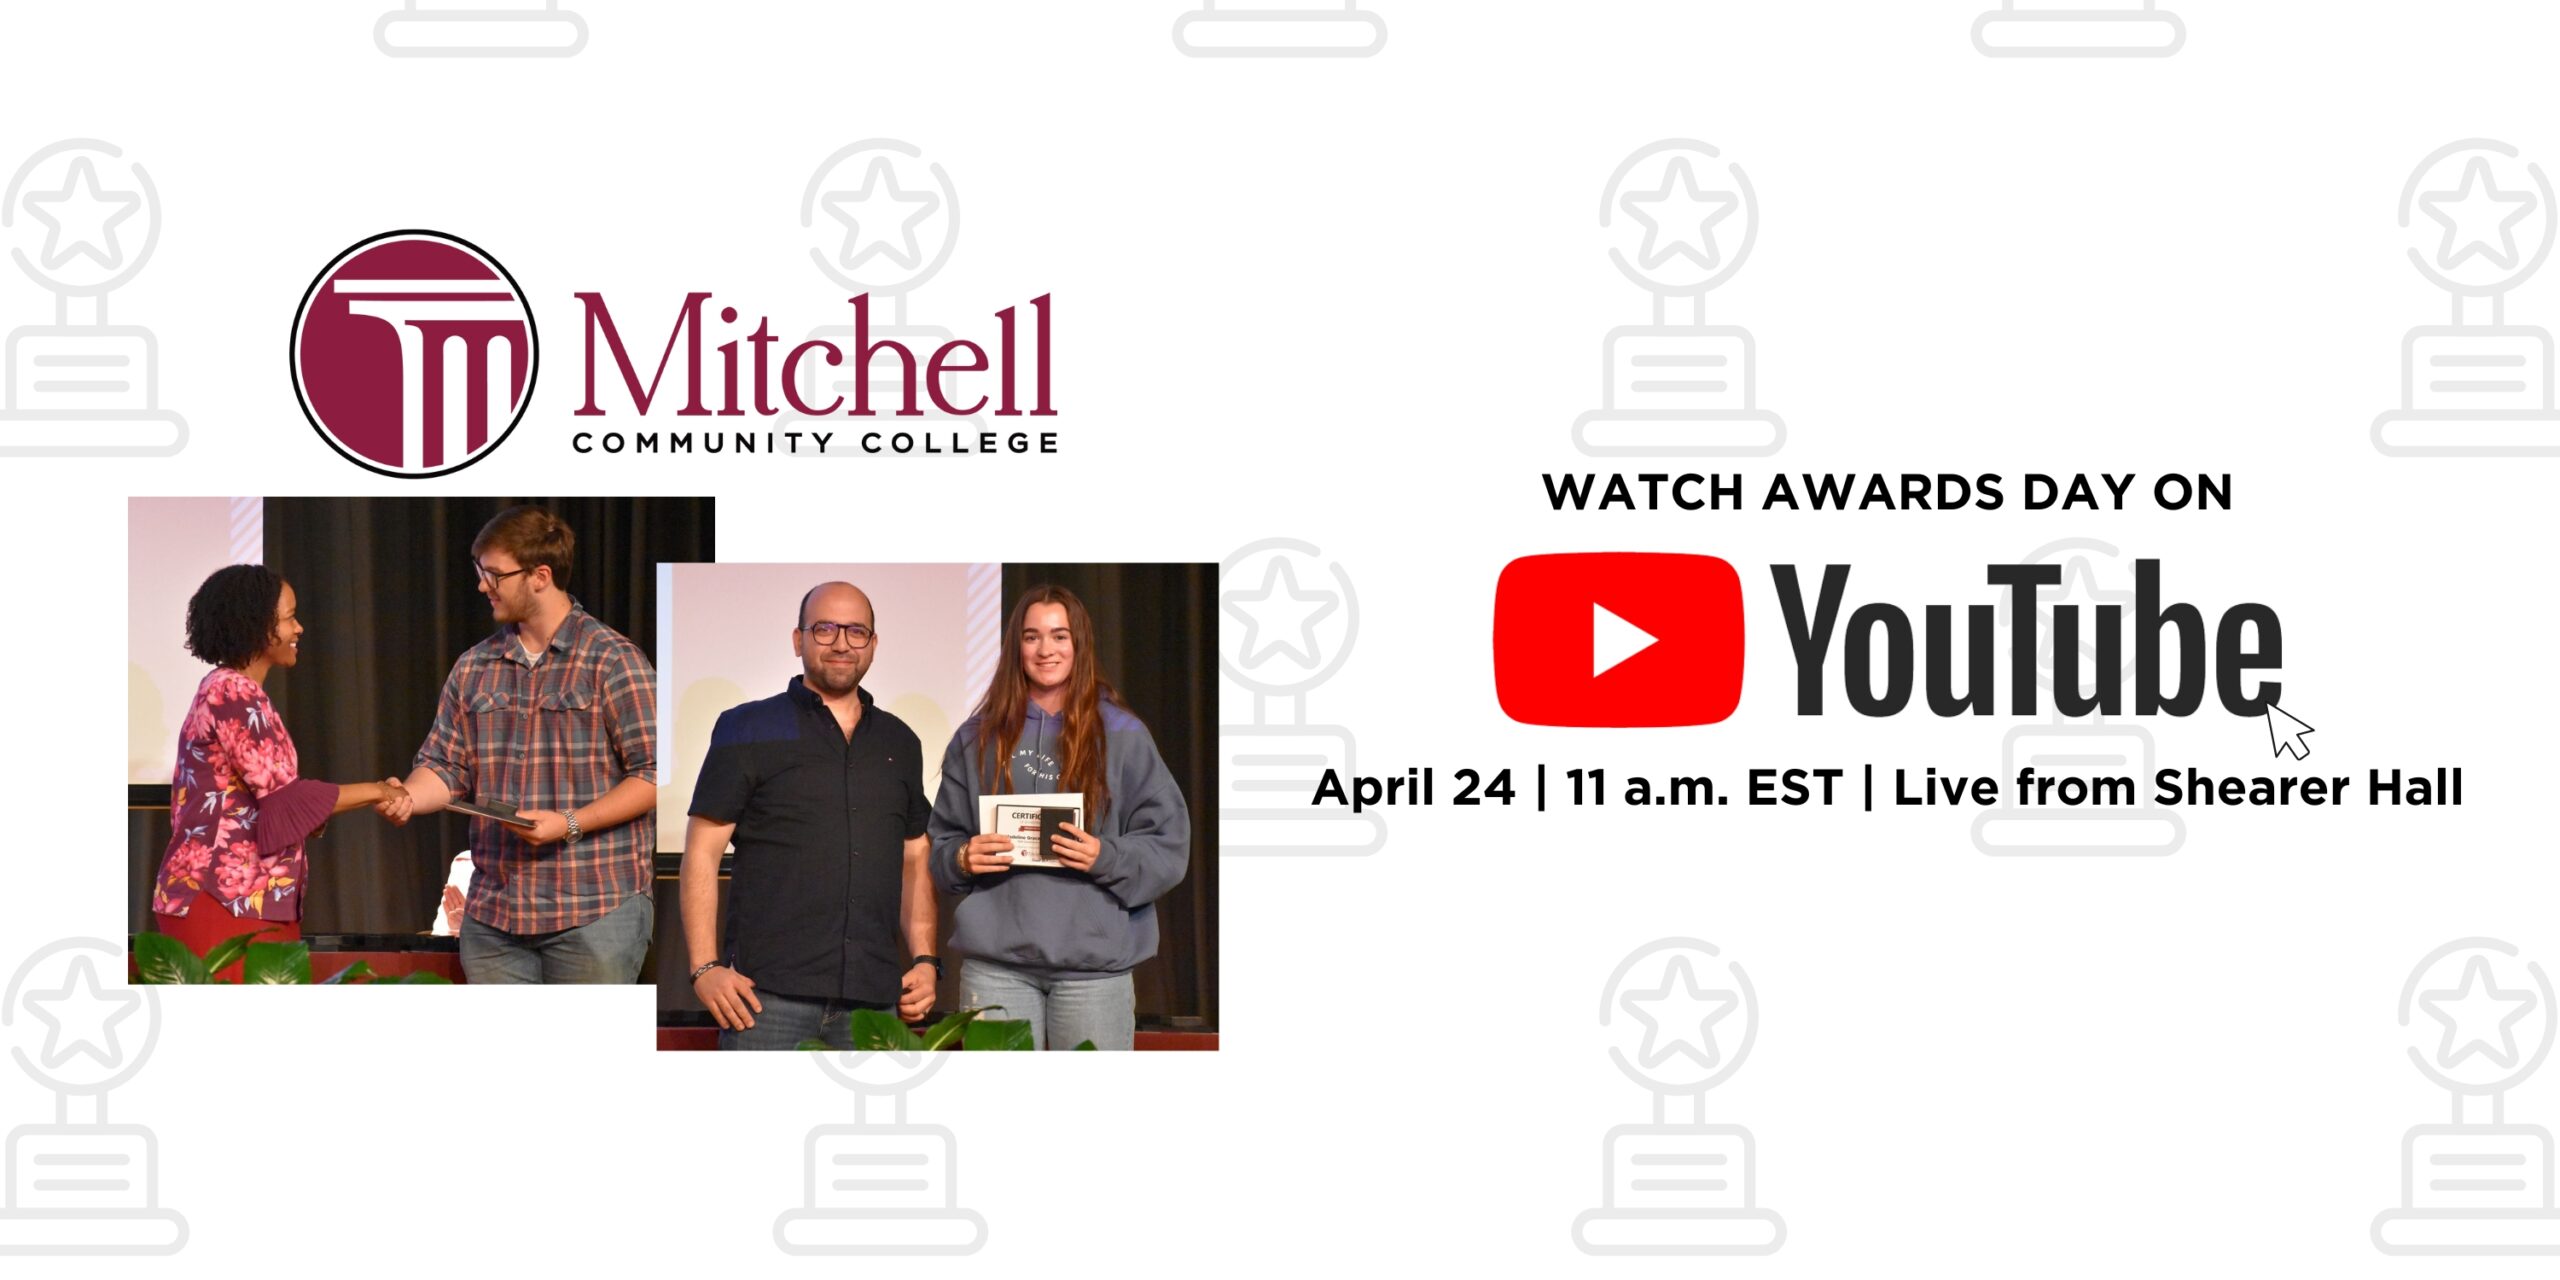 Banner that reads "Watch Awards Day On YouTube - April 24 | 11 a.m. EST | LIVE from Shearer Hall".